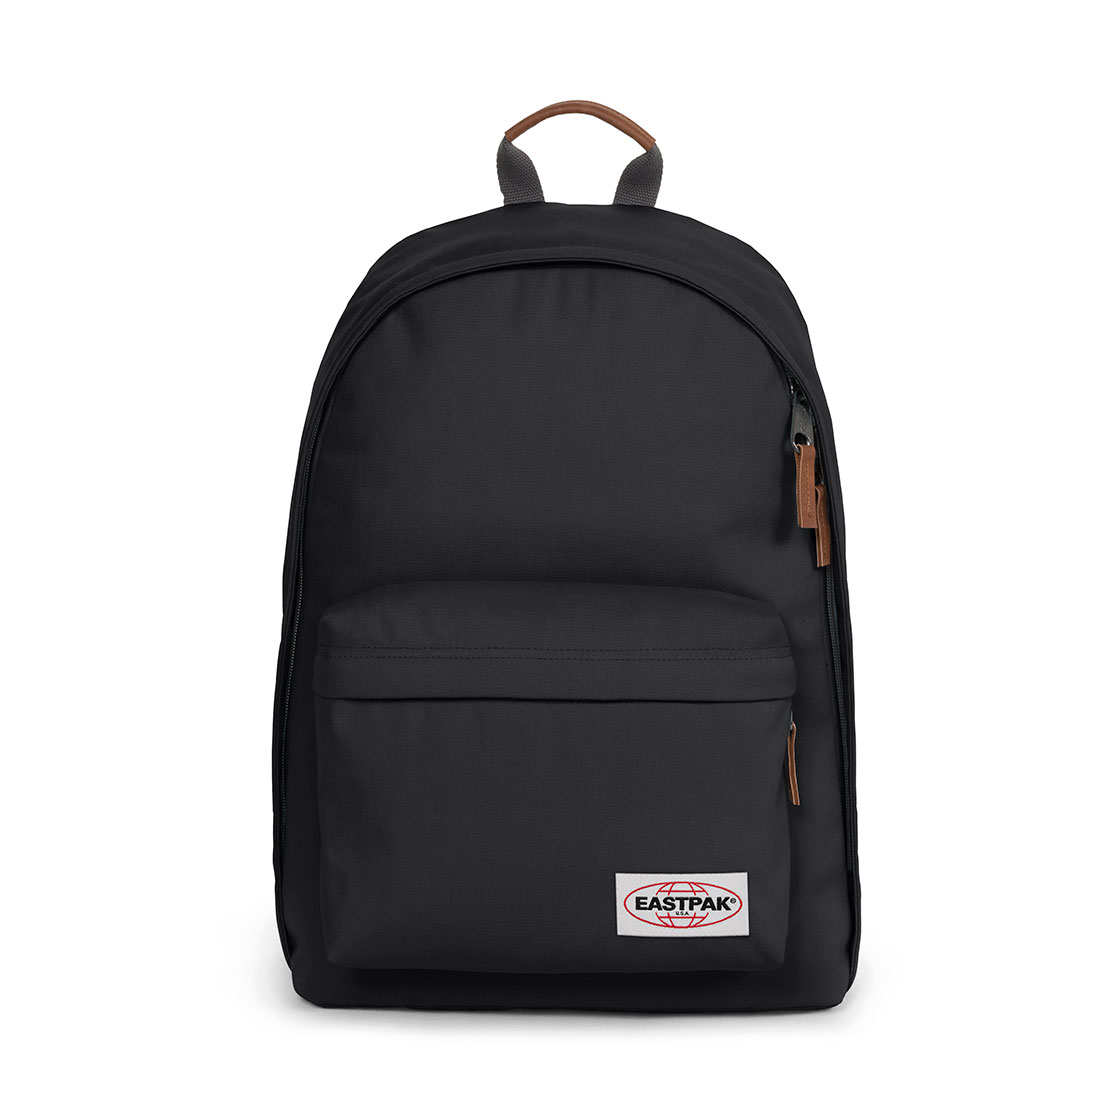 Eastpak Out Of Office - 69,90 €